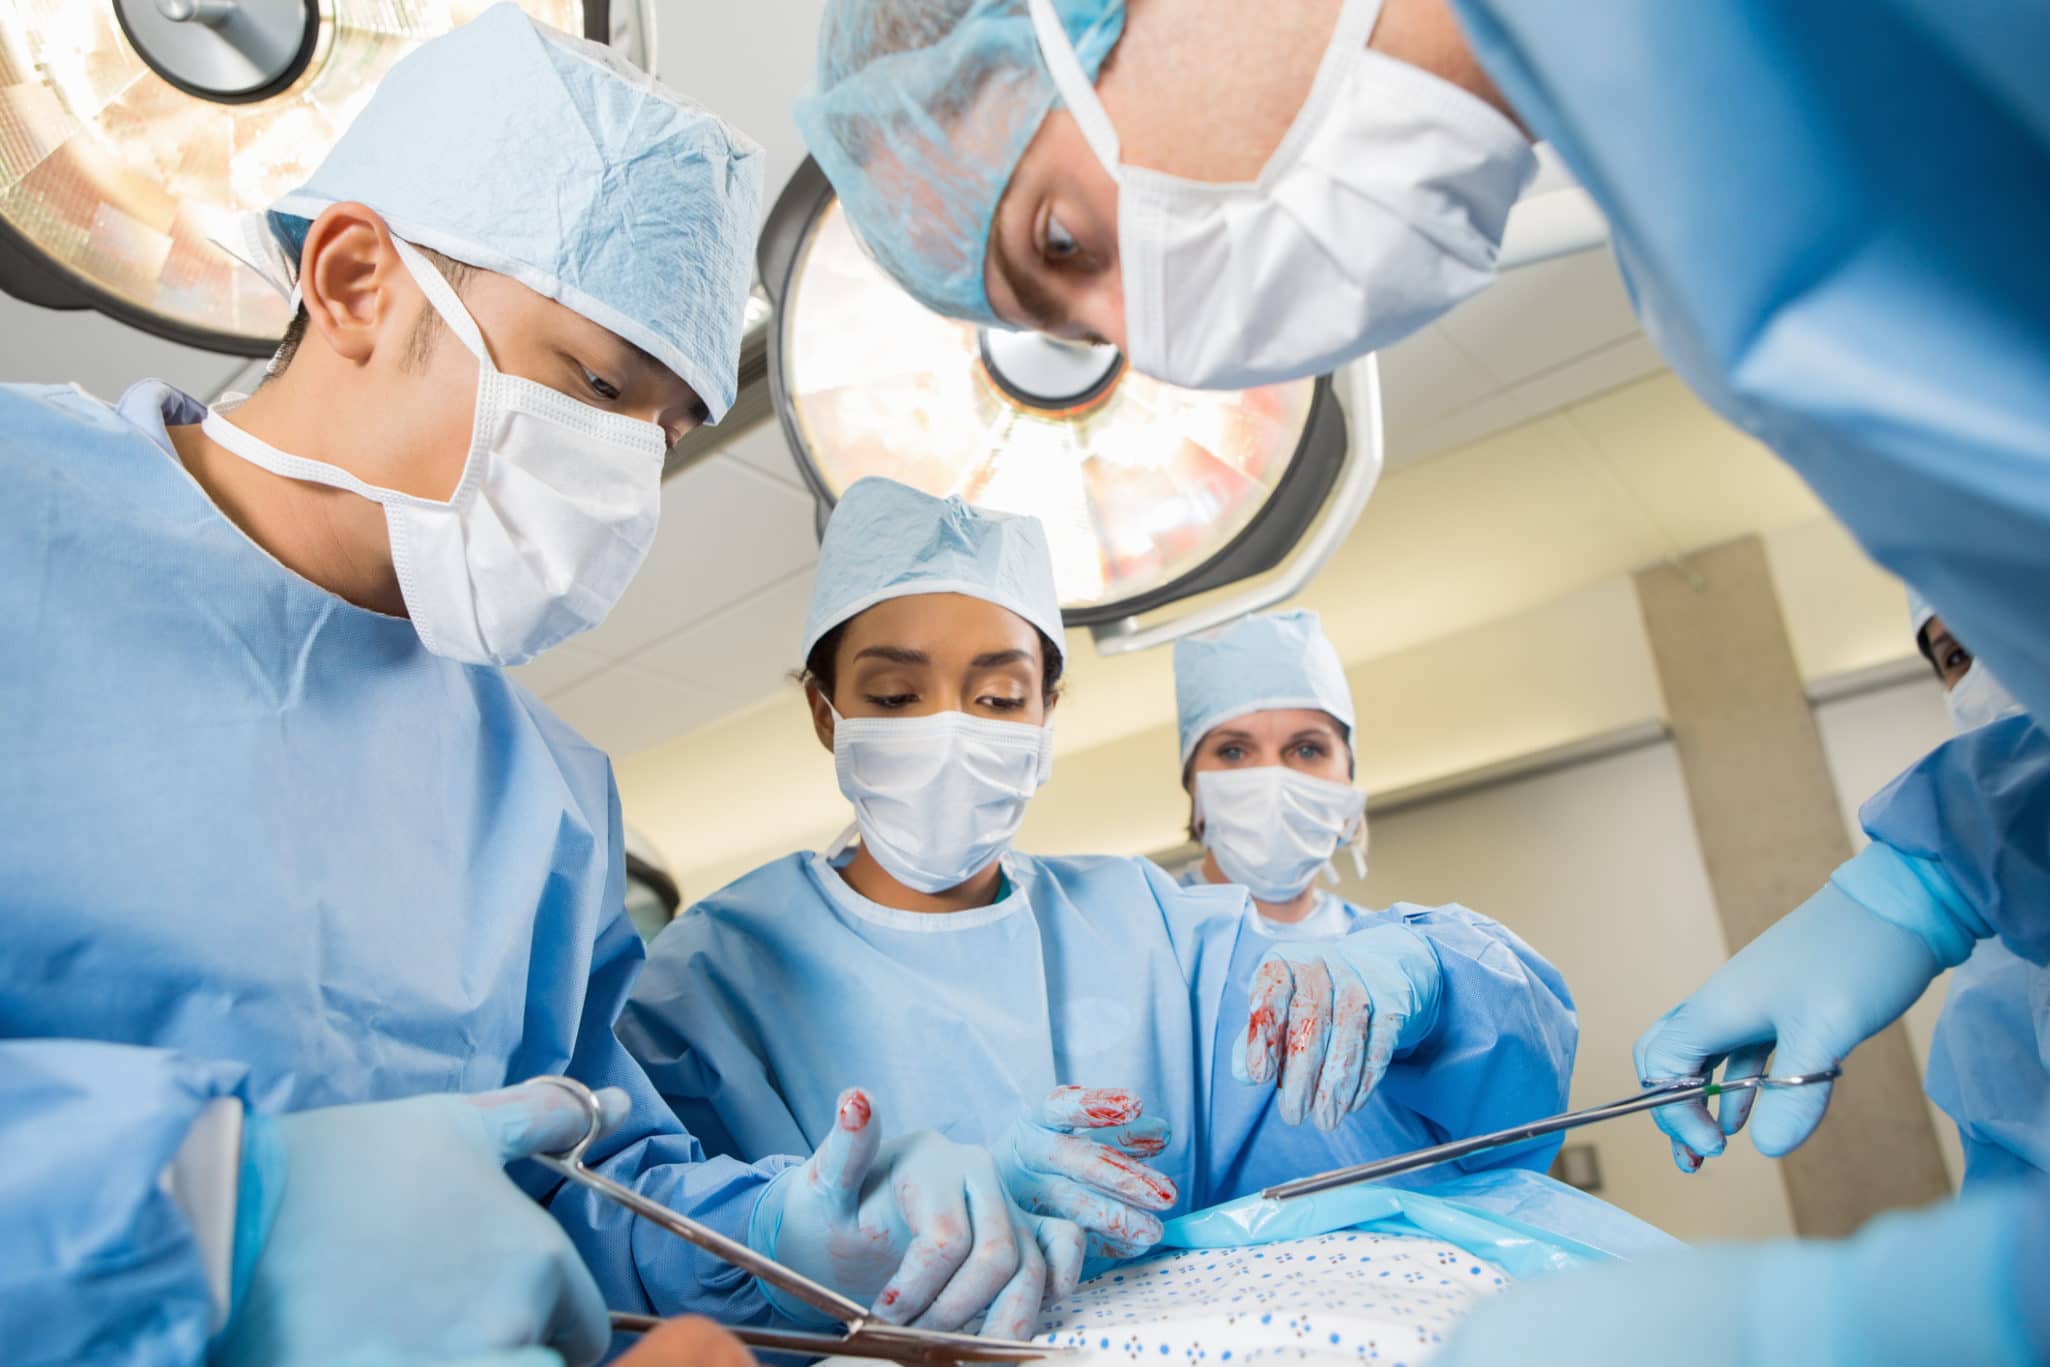 Surgeons performing heart operation on patient in operating room